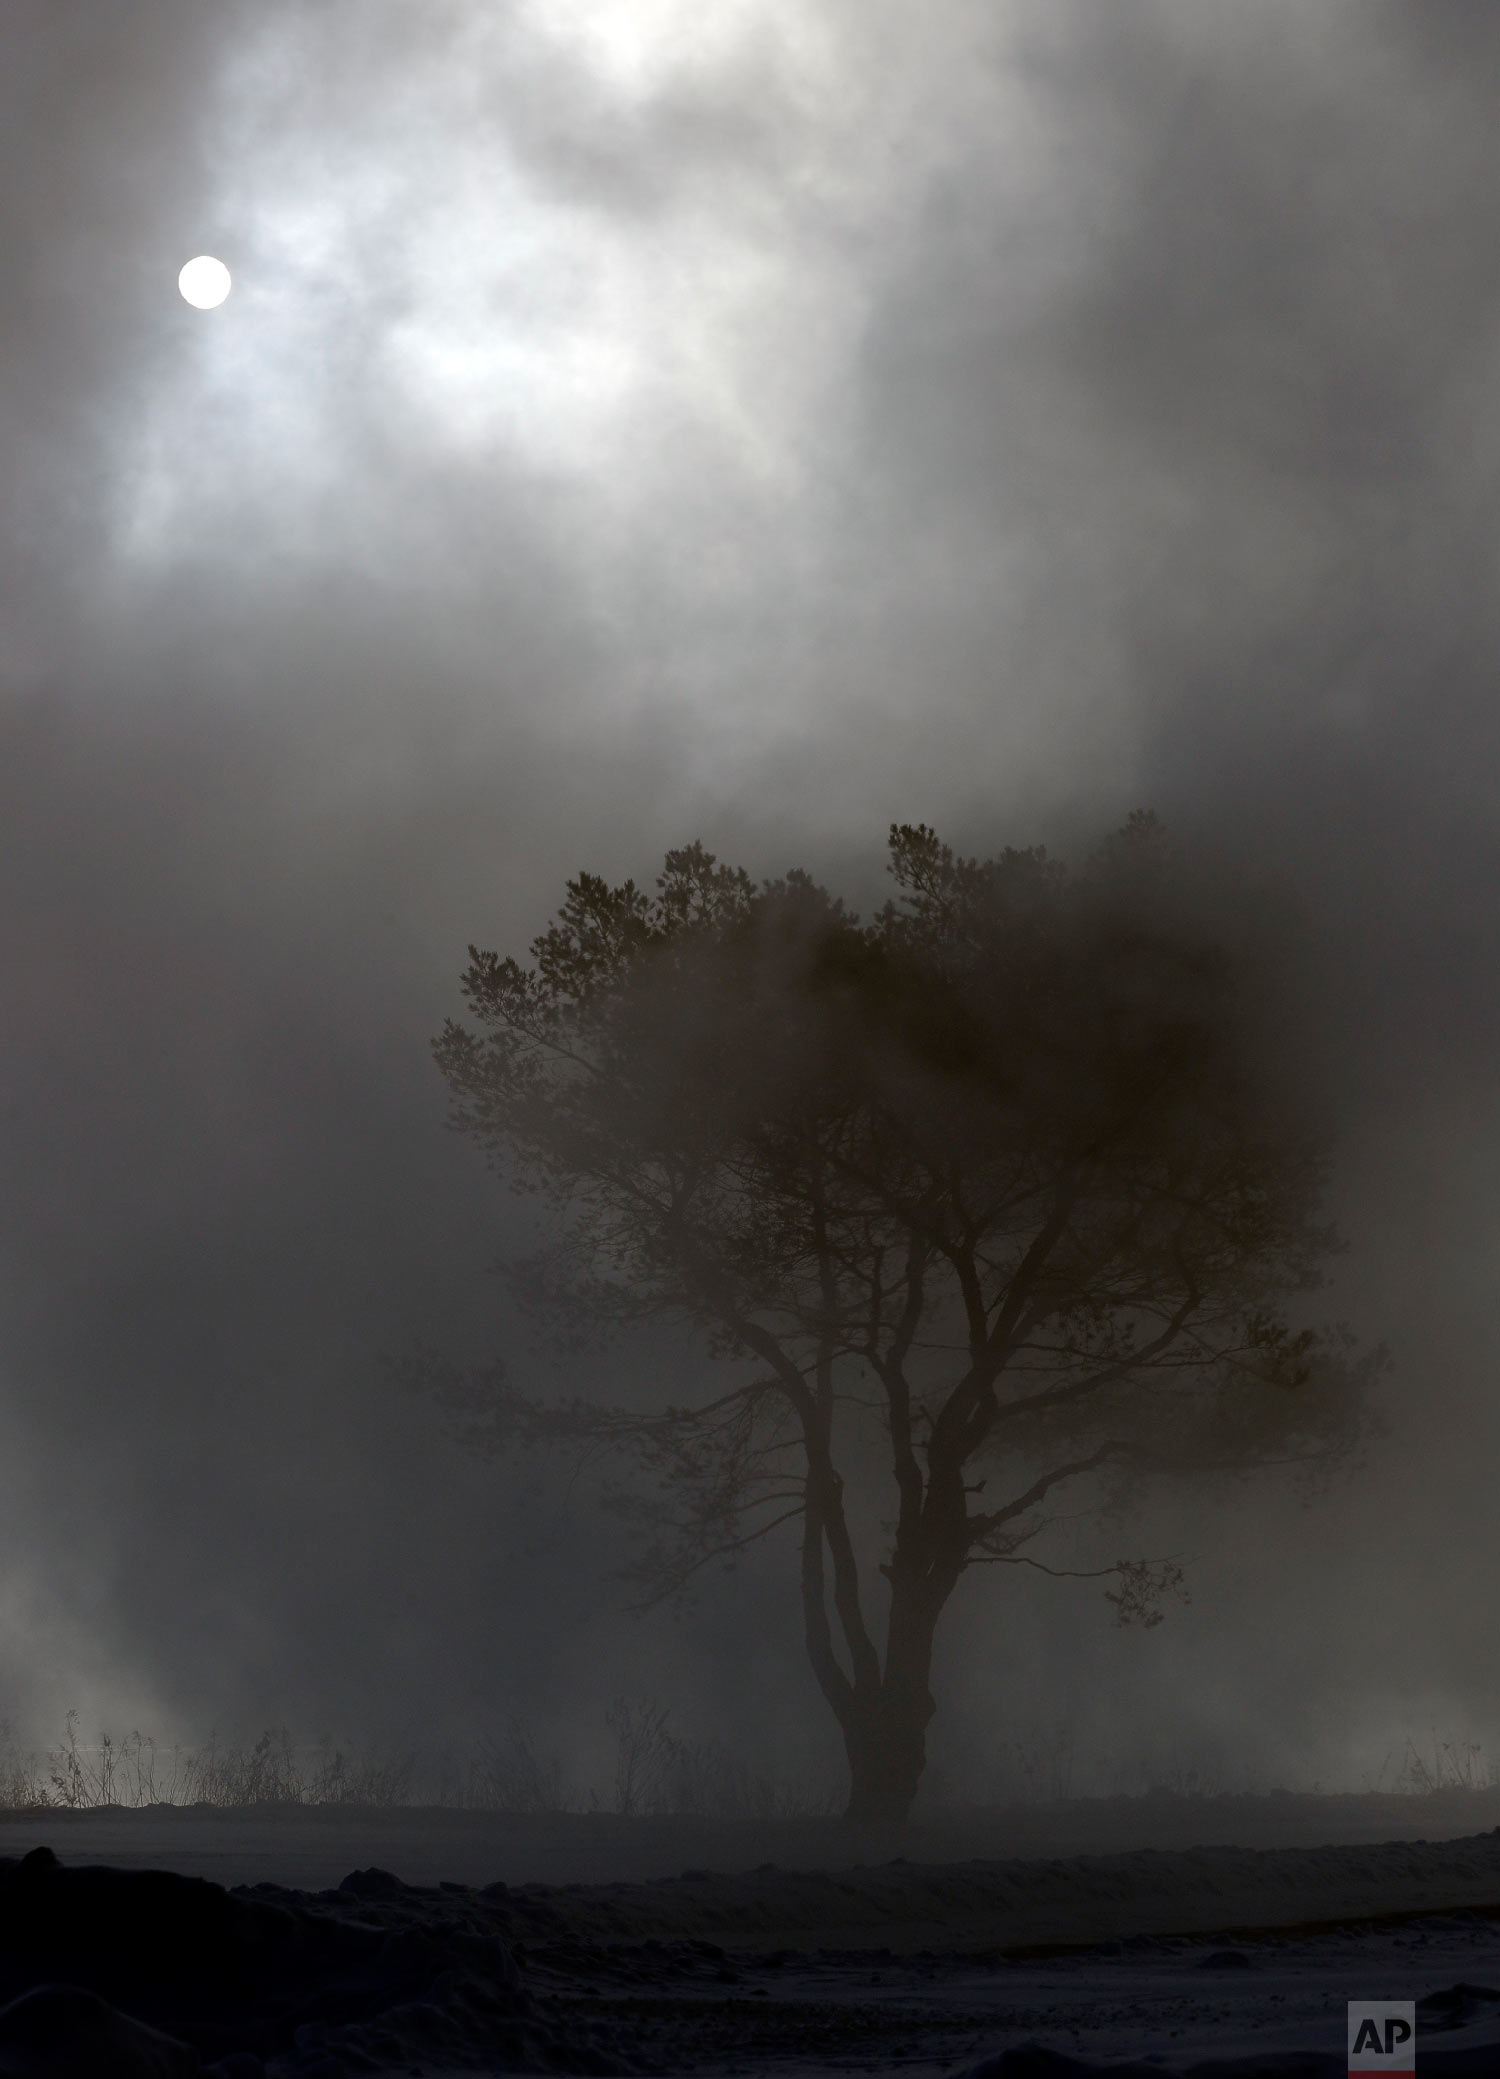  A tree is shrouded in fog at Northwestern University in Evanston, Ill., Wednesday, Jan. 30, 2019. (AP Photo/Nam Y. Huh) 